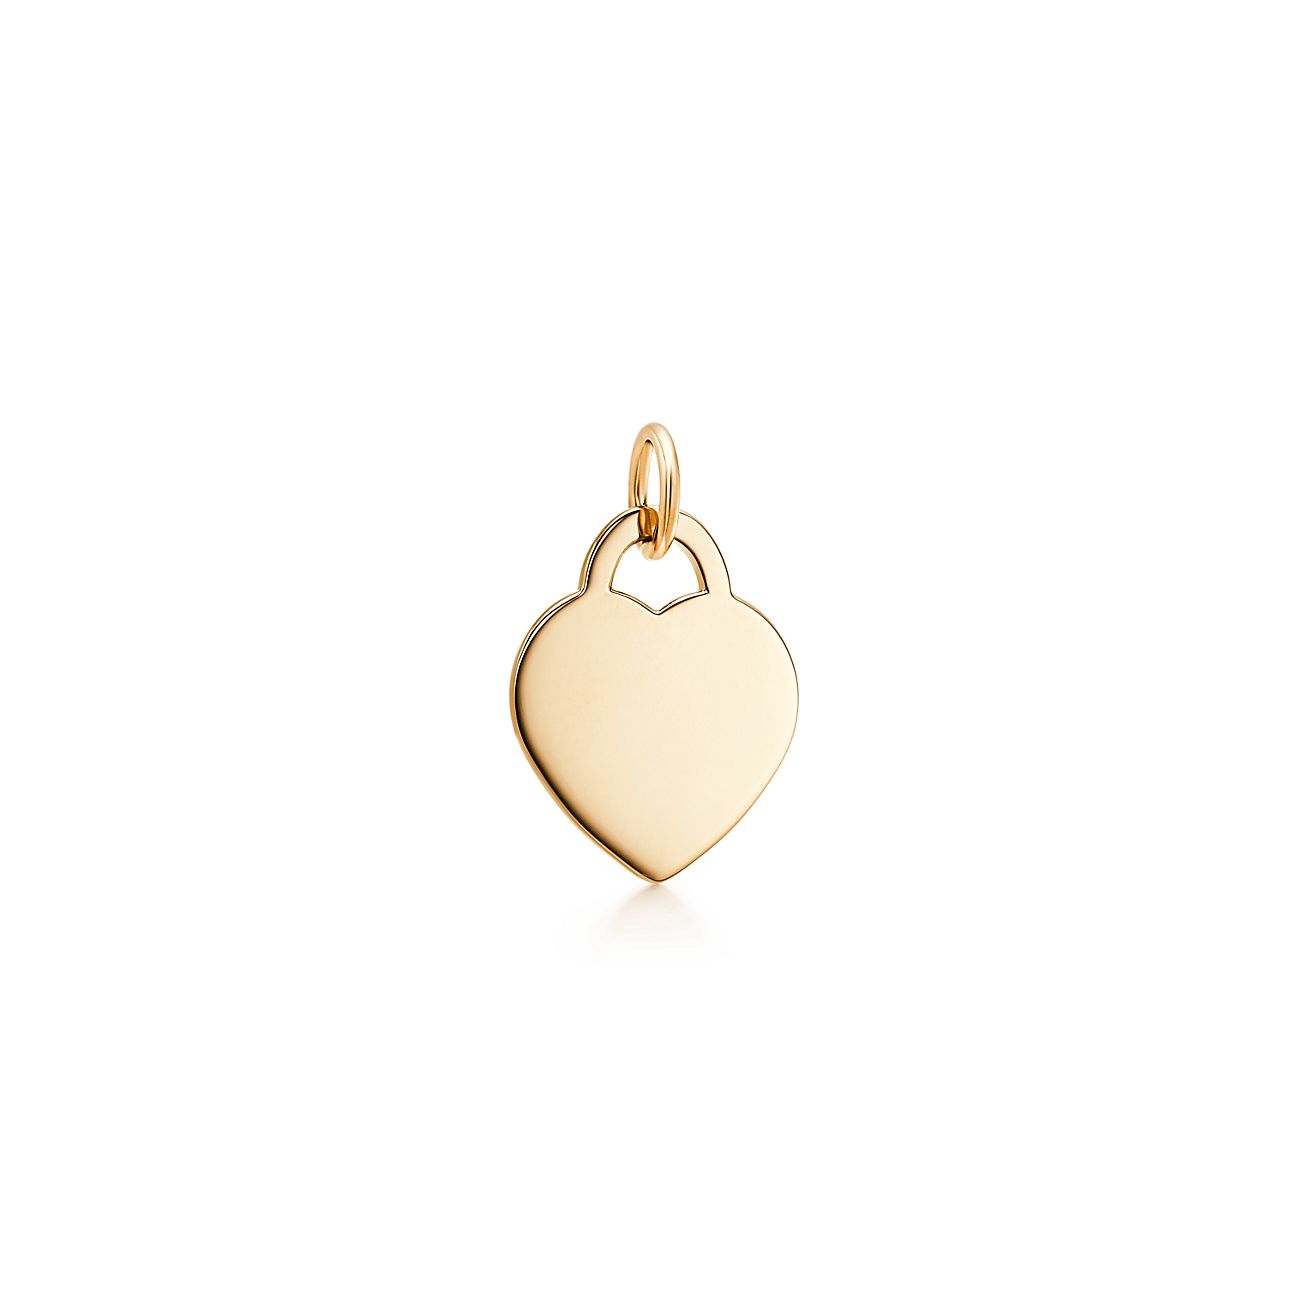 Heart tag charm in 18k gold, small 